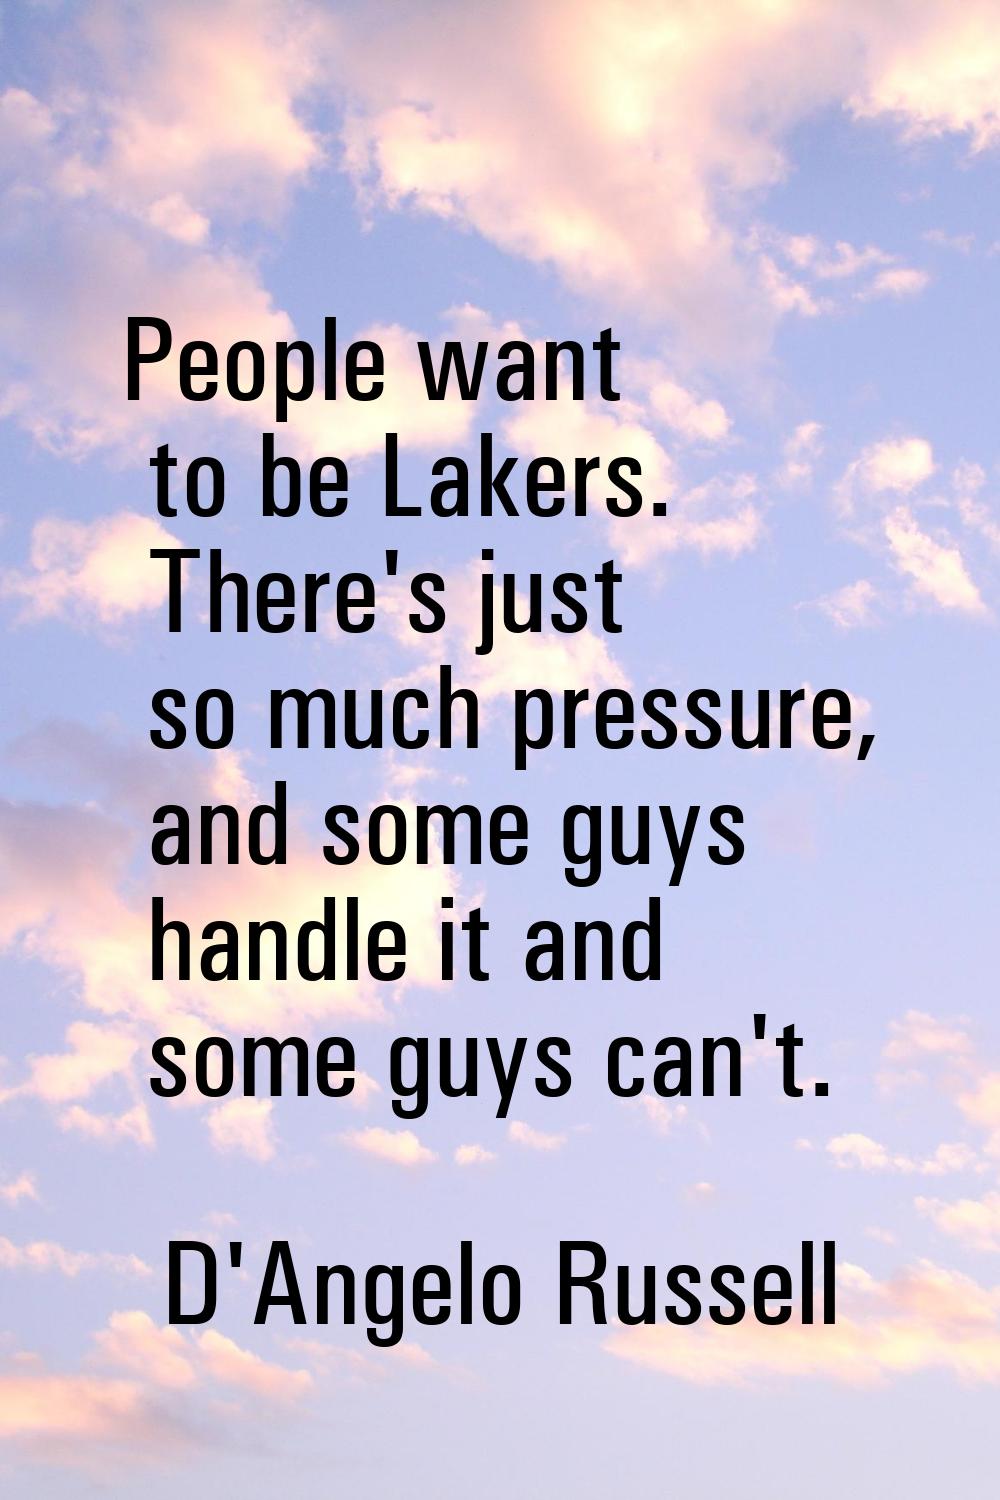 People want to be Lakers. There's just so much pressure, and some guys handle it and some guys can'